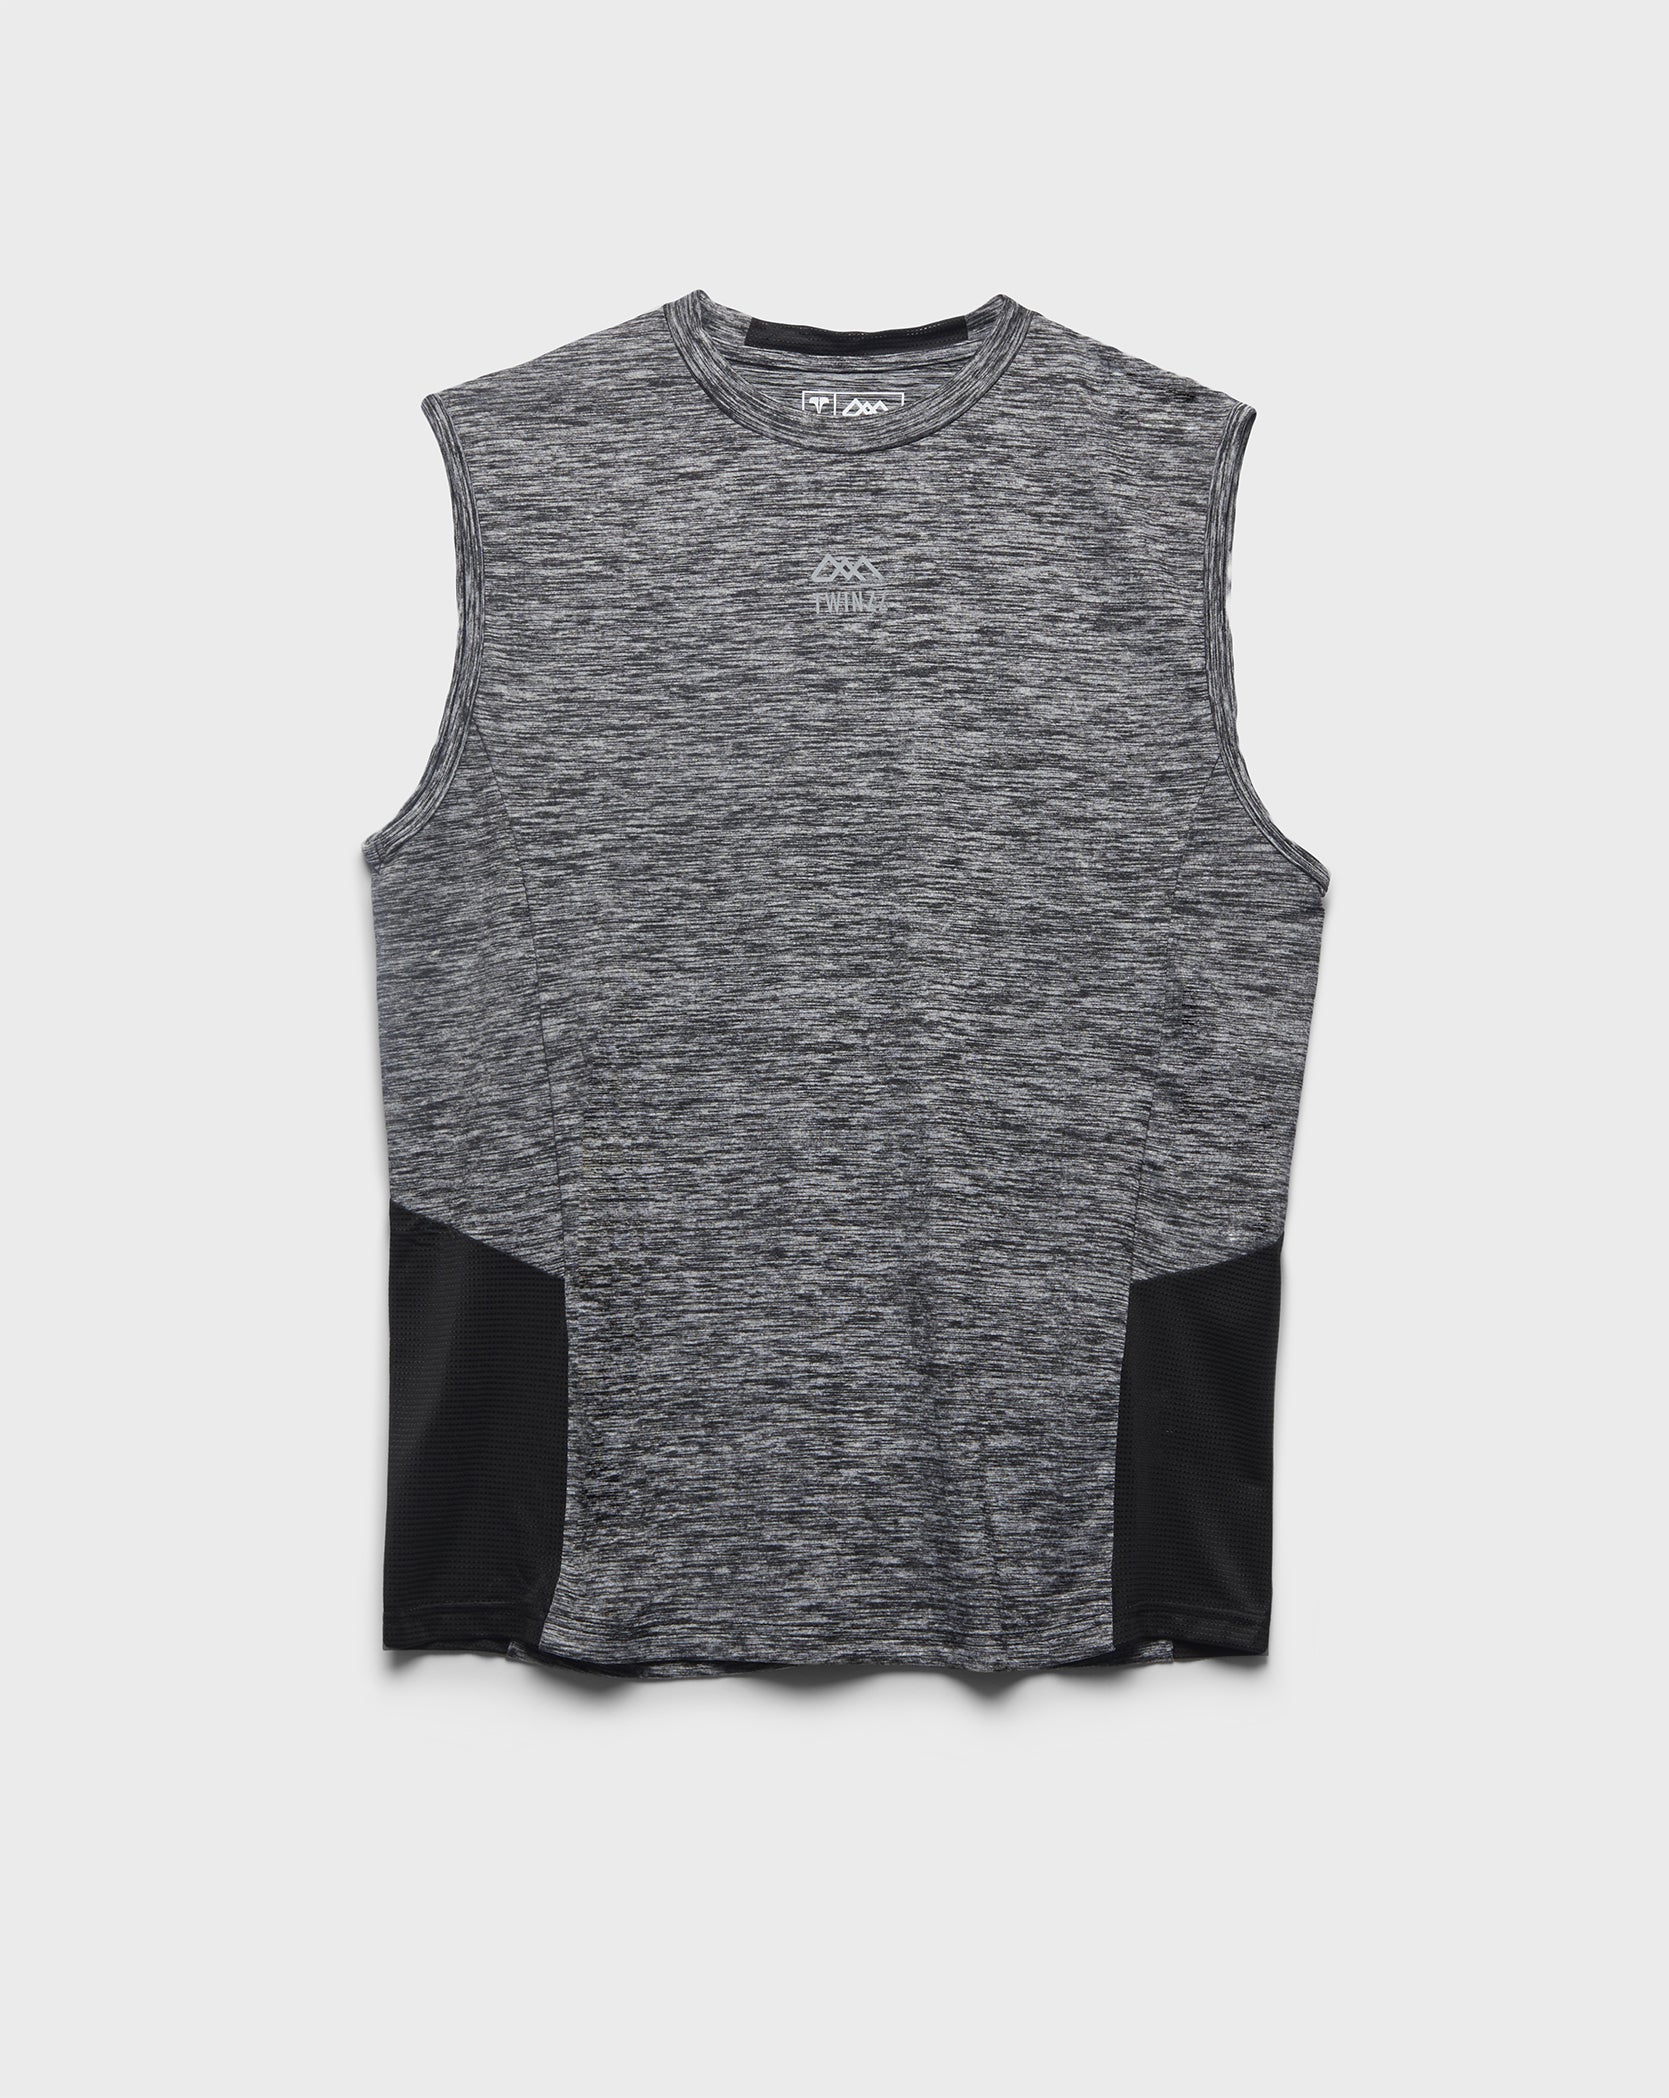 Grey and back Twinzz sleeveless active tee